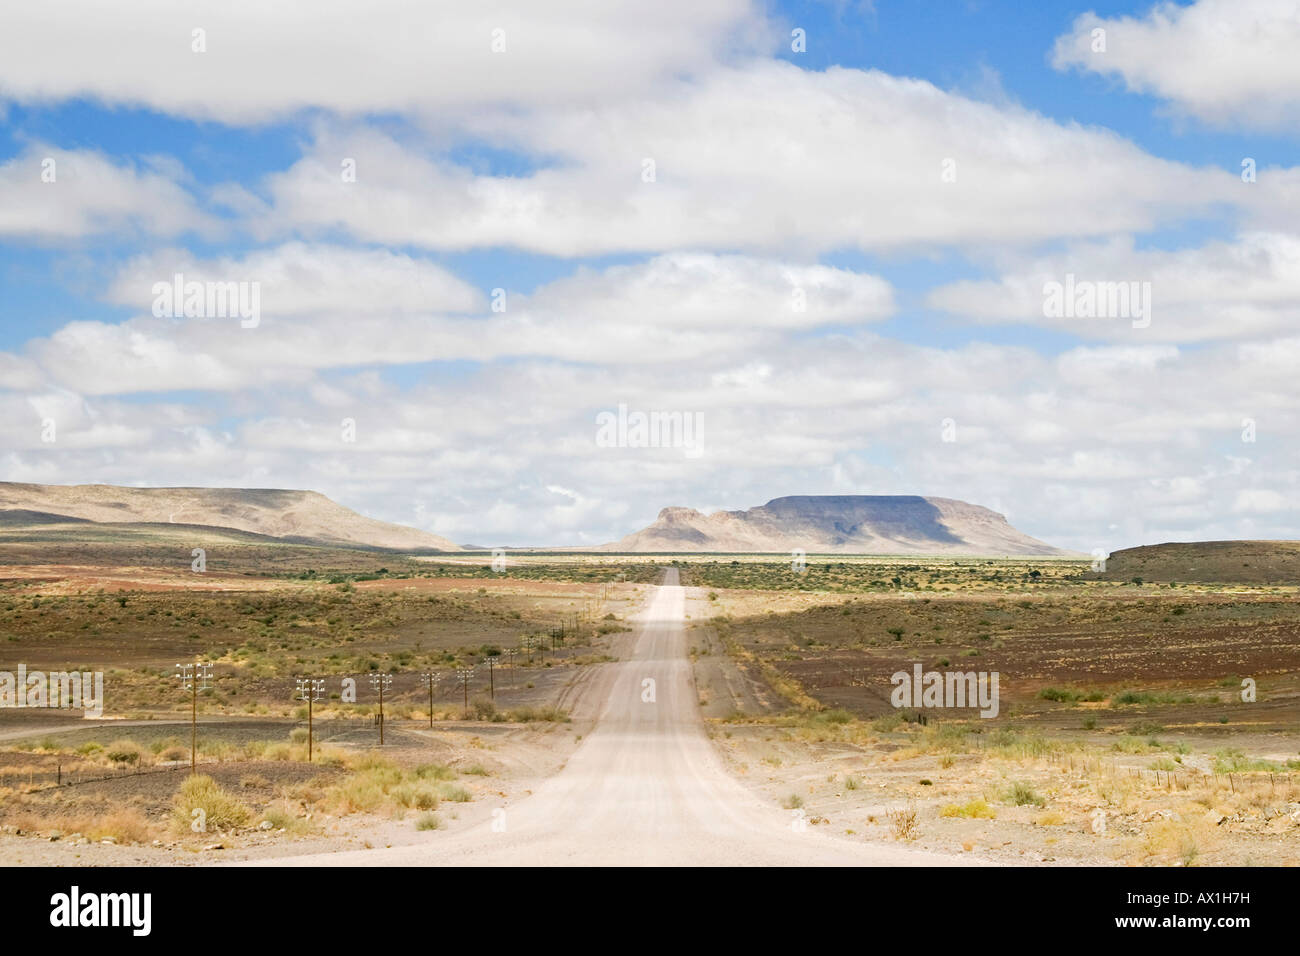 Gravelroad to the South of Namibia, Africa Stock Photo